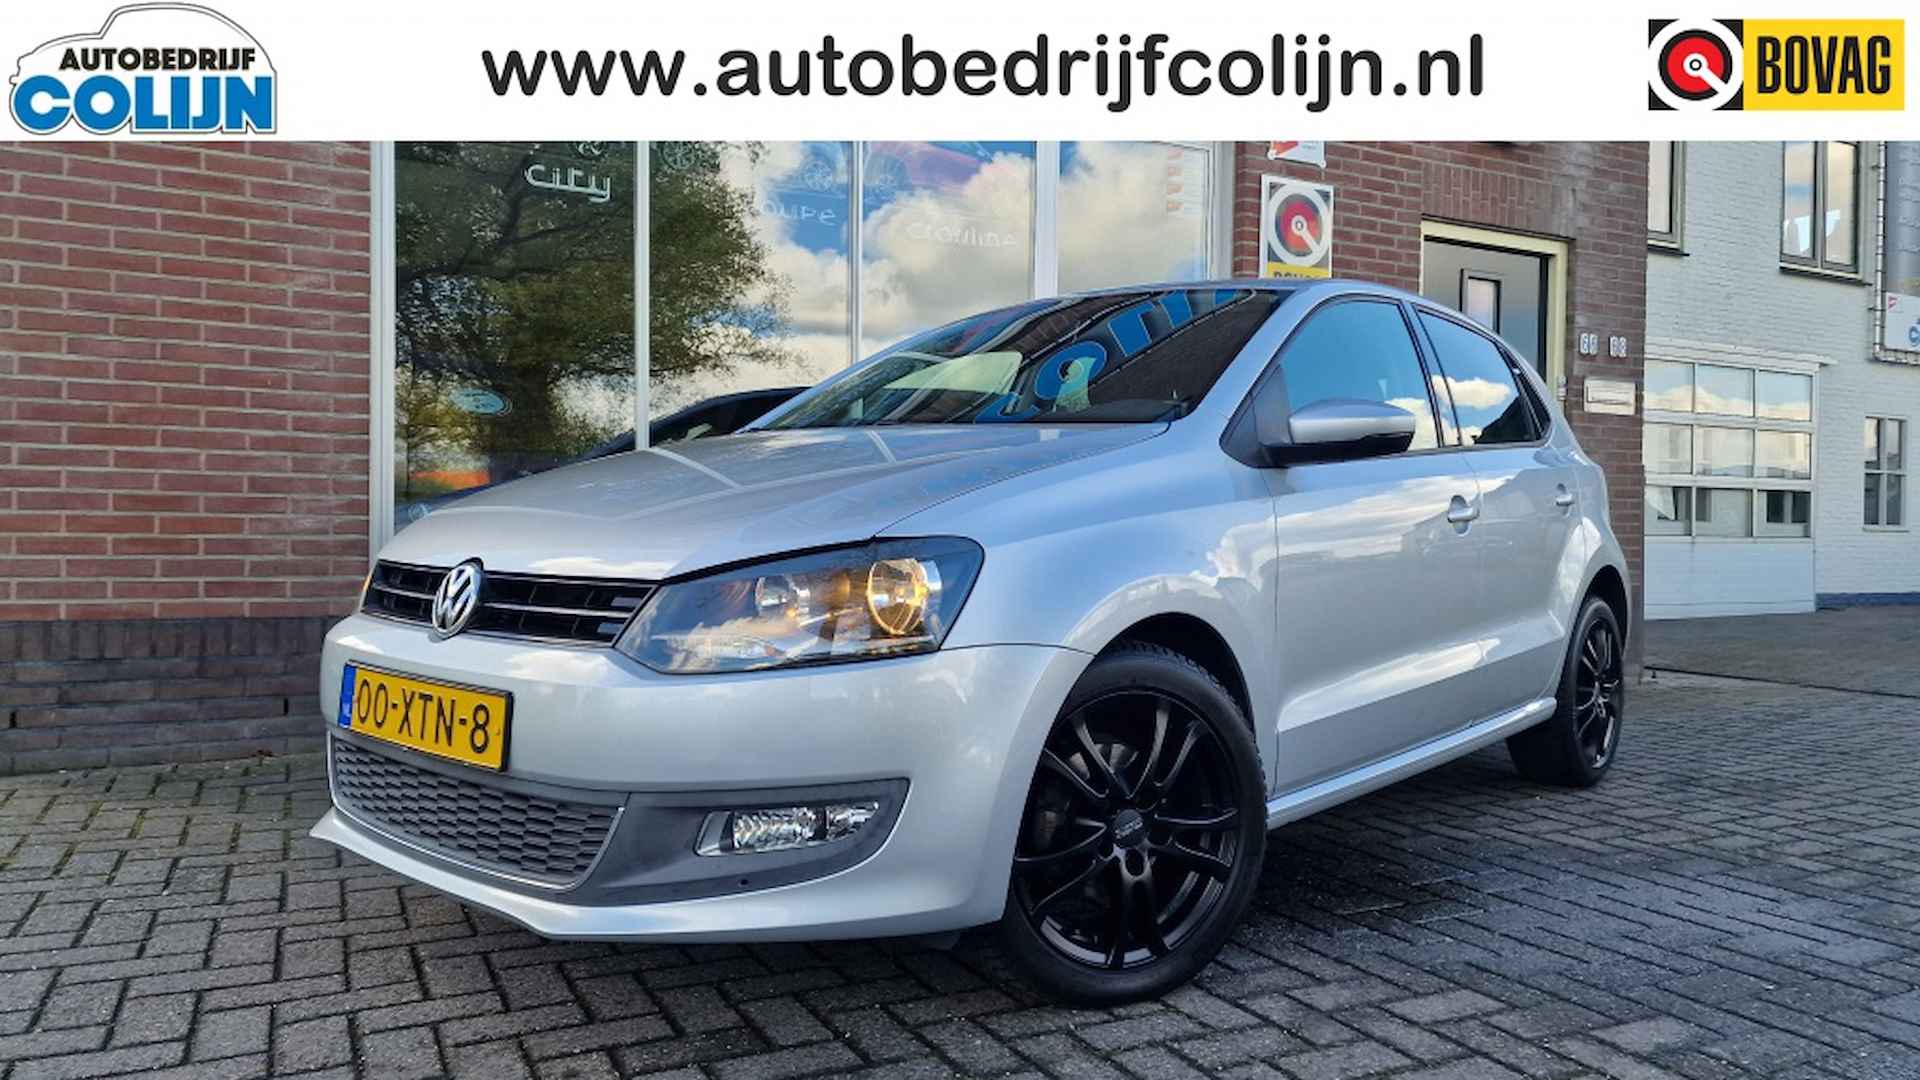 Volkswagen Polo 1.2 TSI Highline, Automaat, Cruise, Climate control - 1/19